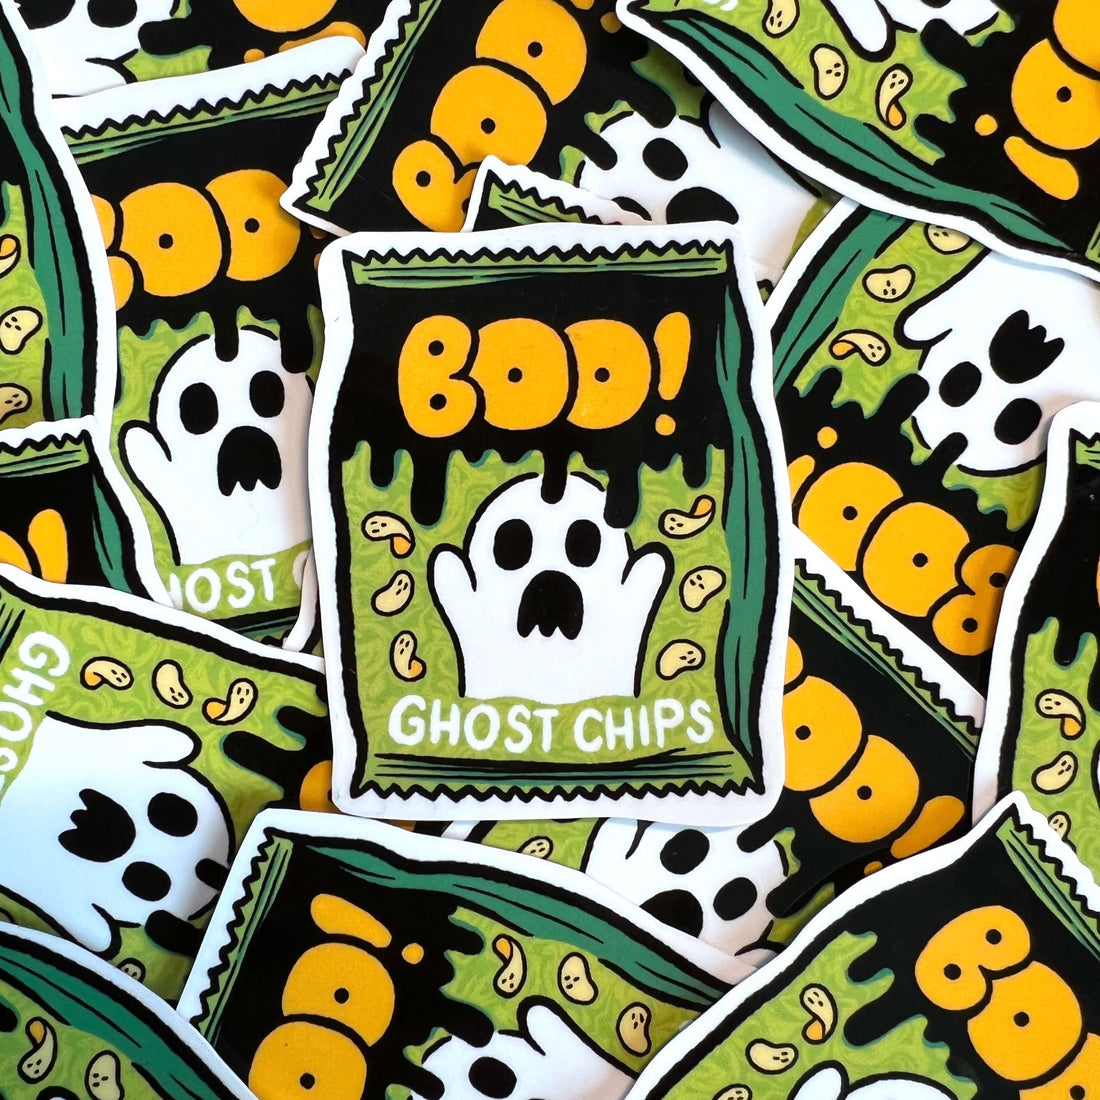 Boo! Ghost Chips Sticker